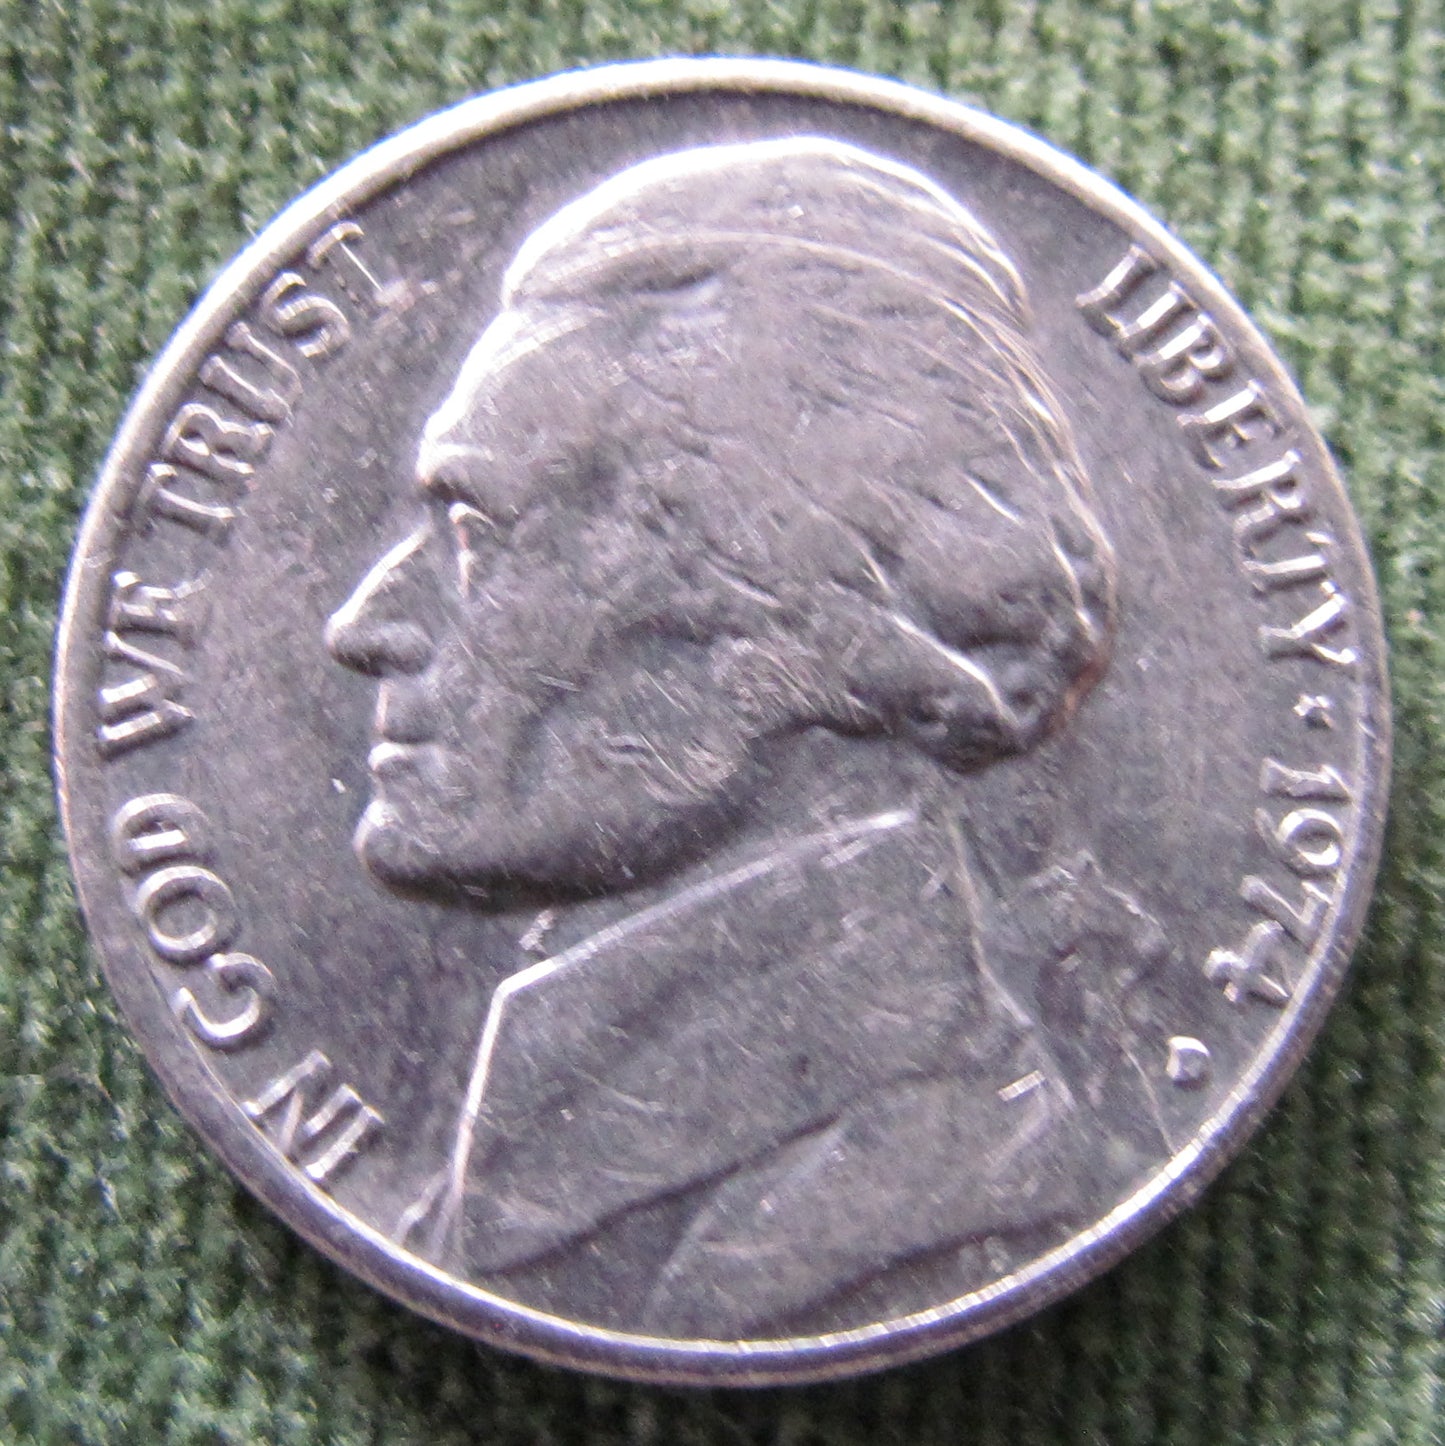 USA American 1974 D Nickel Jefferson Coin - Circulated